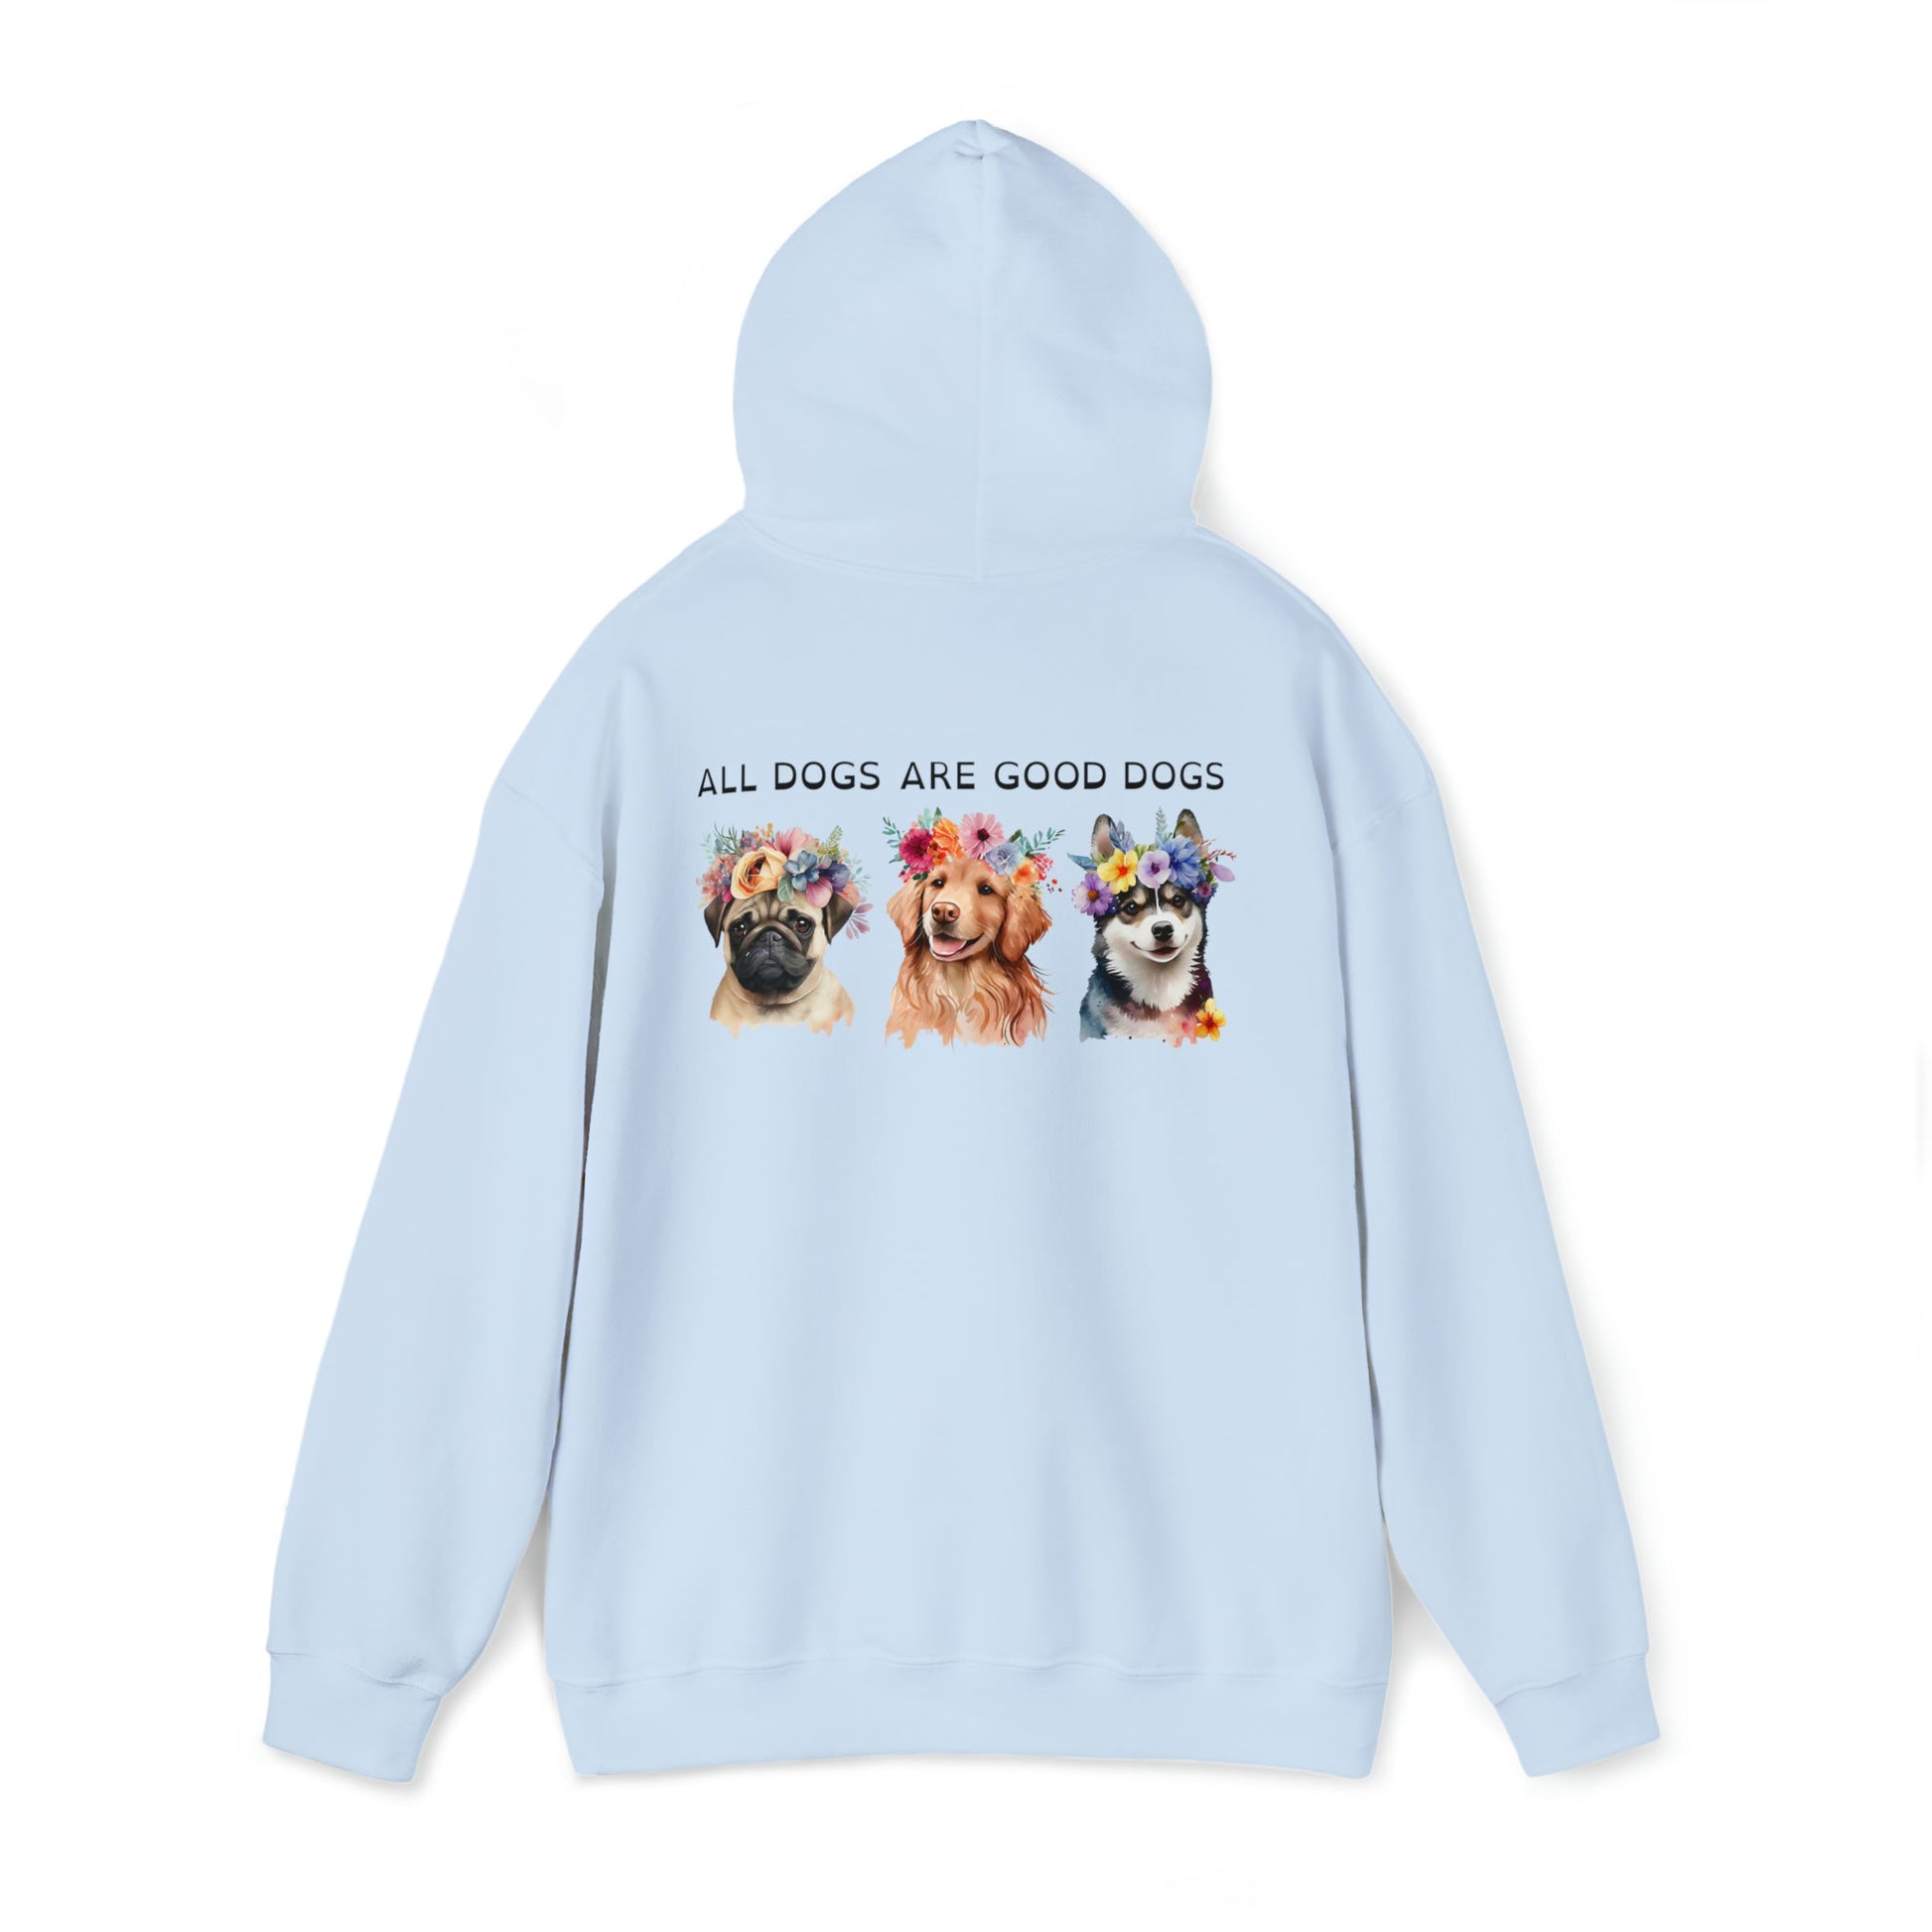 All Dogs Are Good Dogs Unisex Heavy Blend™ Hooded Sweatshirt Sizes S-5XL